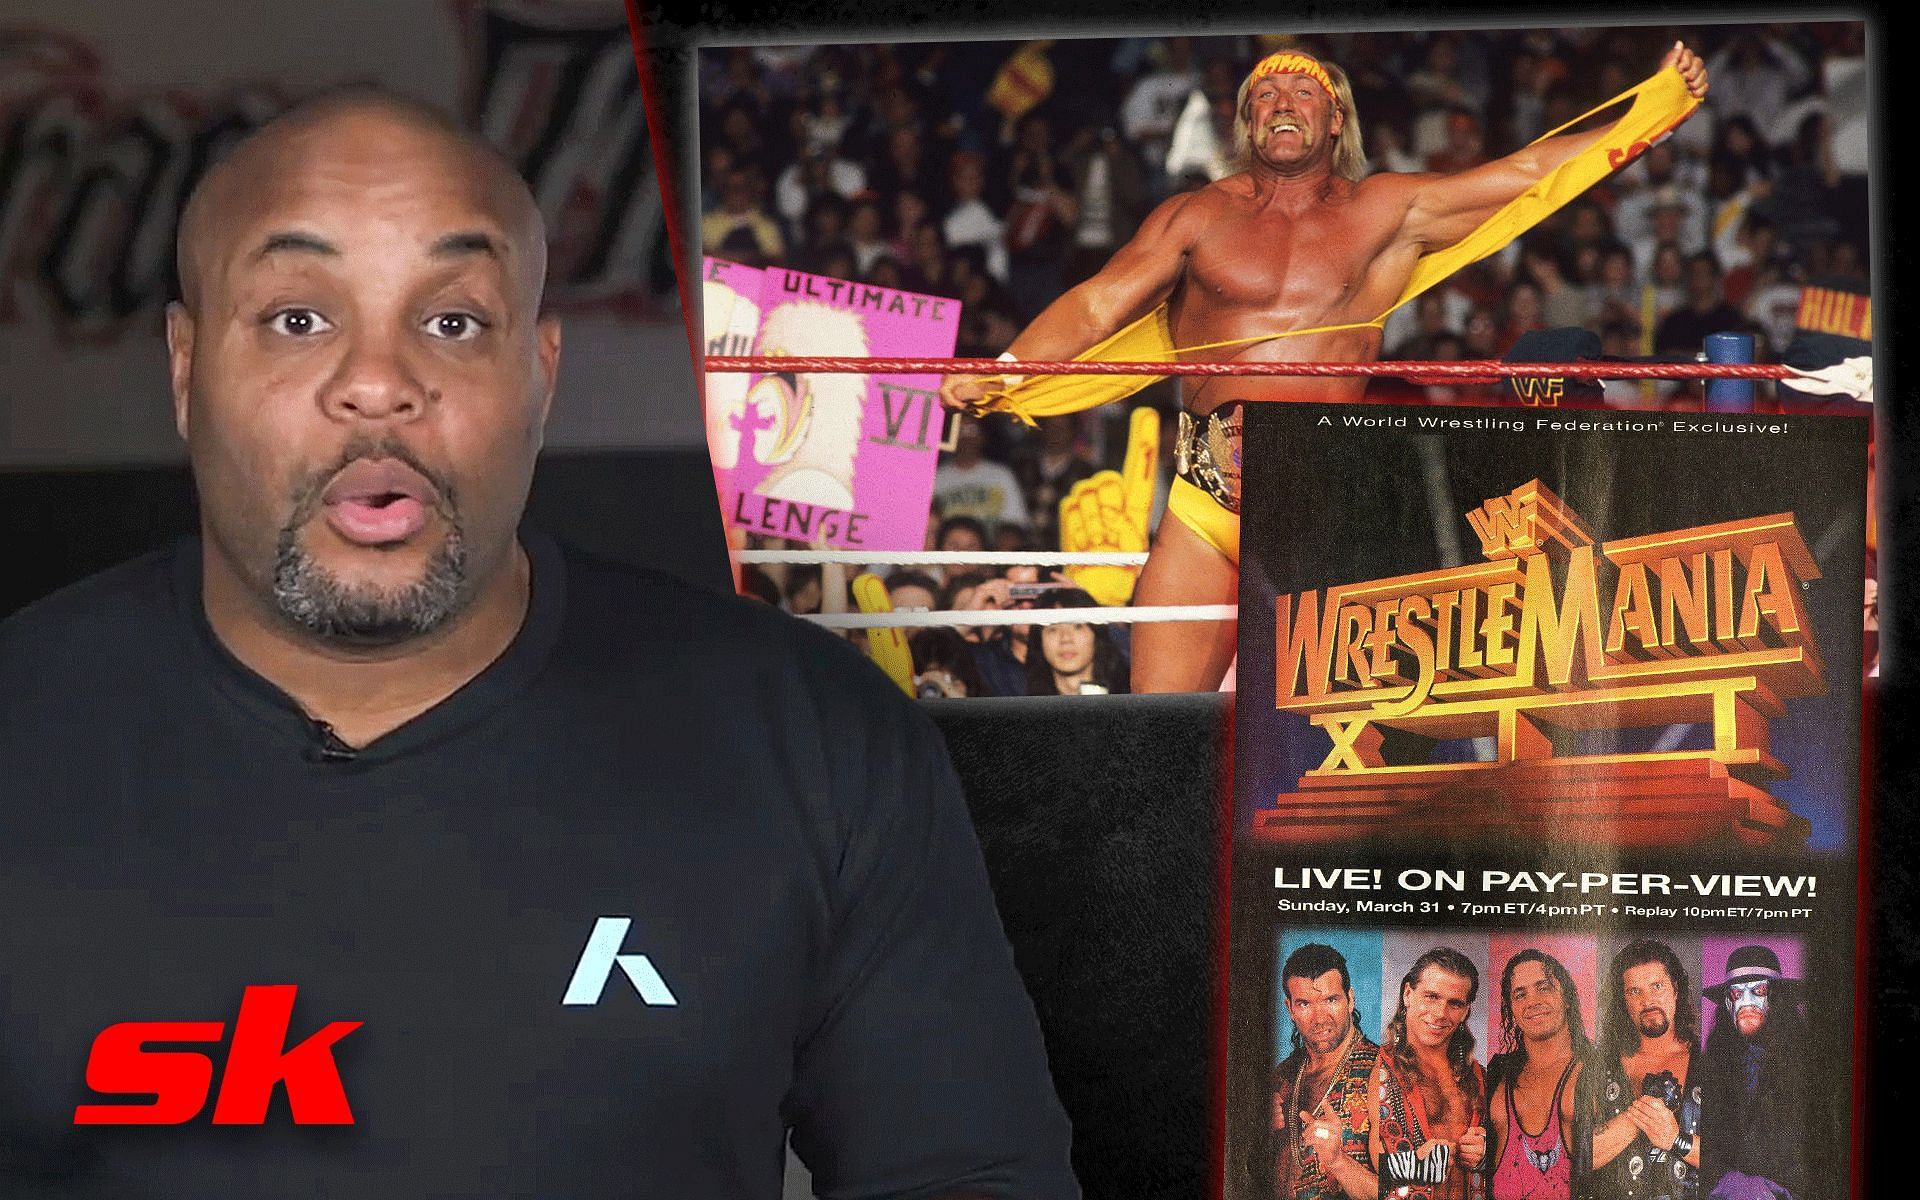 Cormier spent his time in isolation after testing positive for COVID-19 watching classic WrestleMania matches [Credits: @dc_mma, WWE.com]